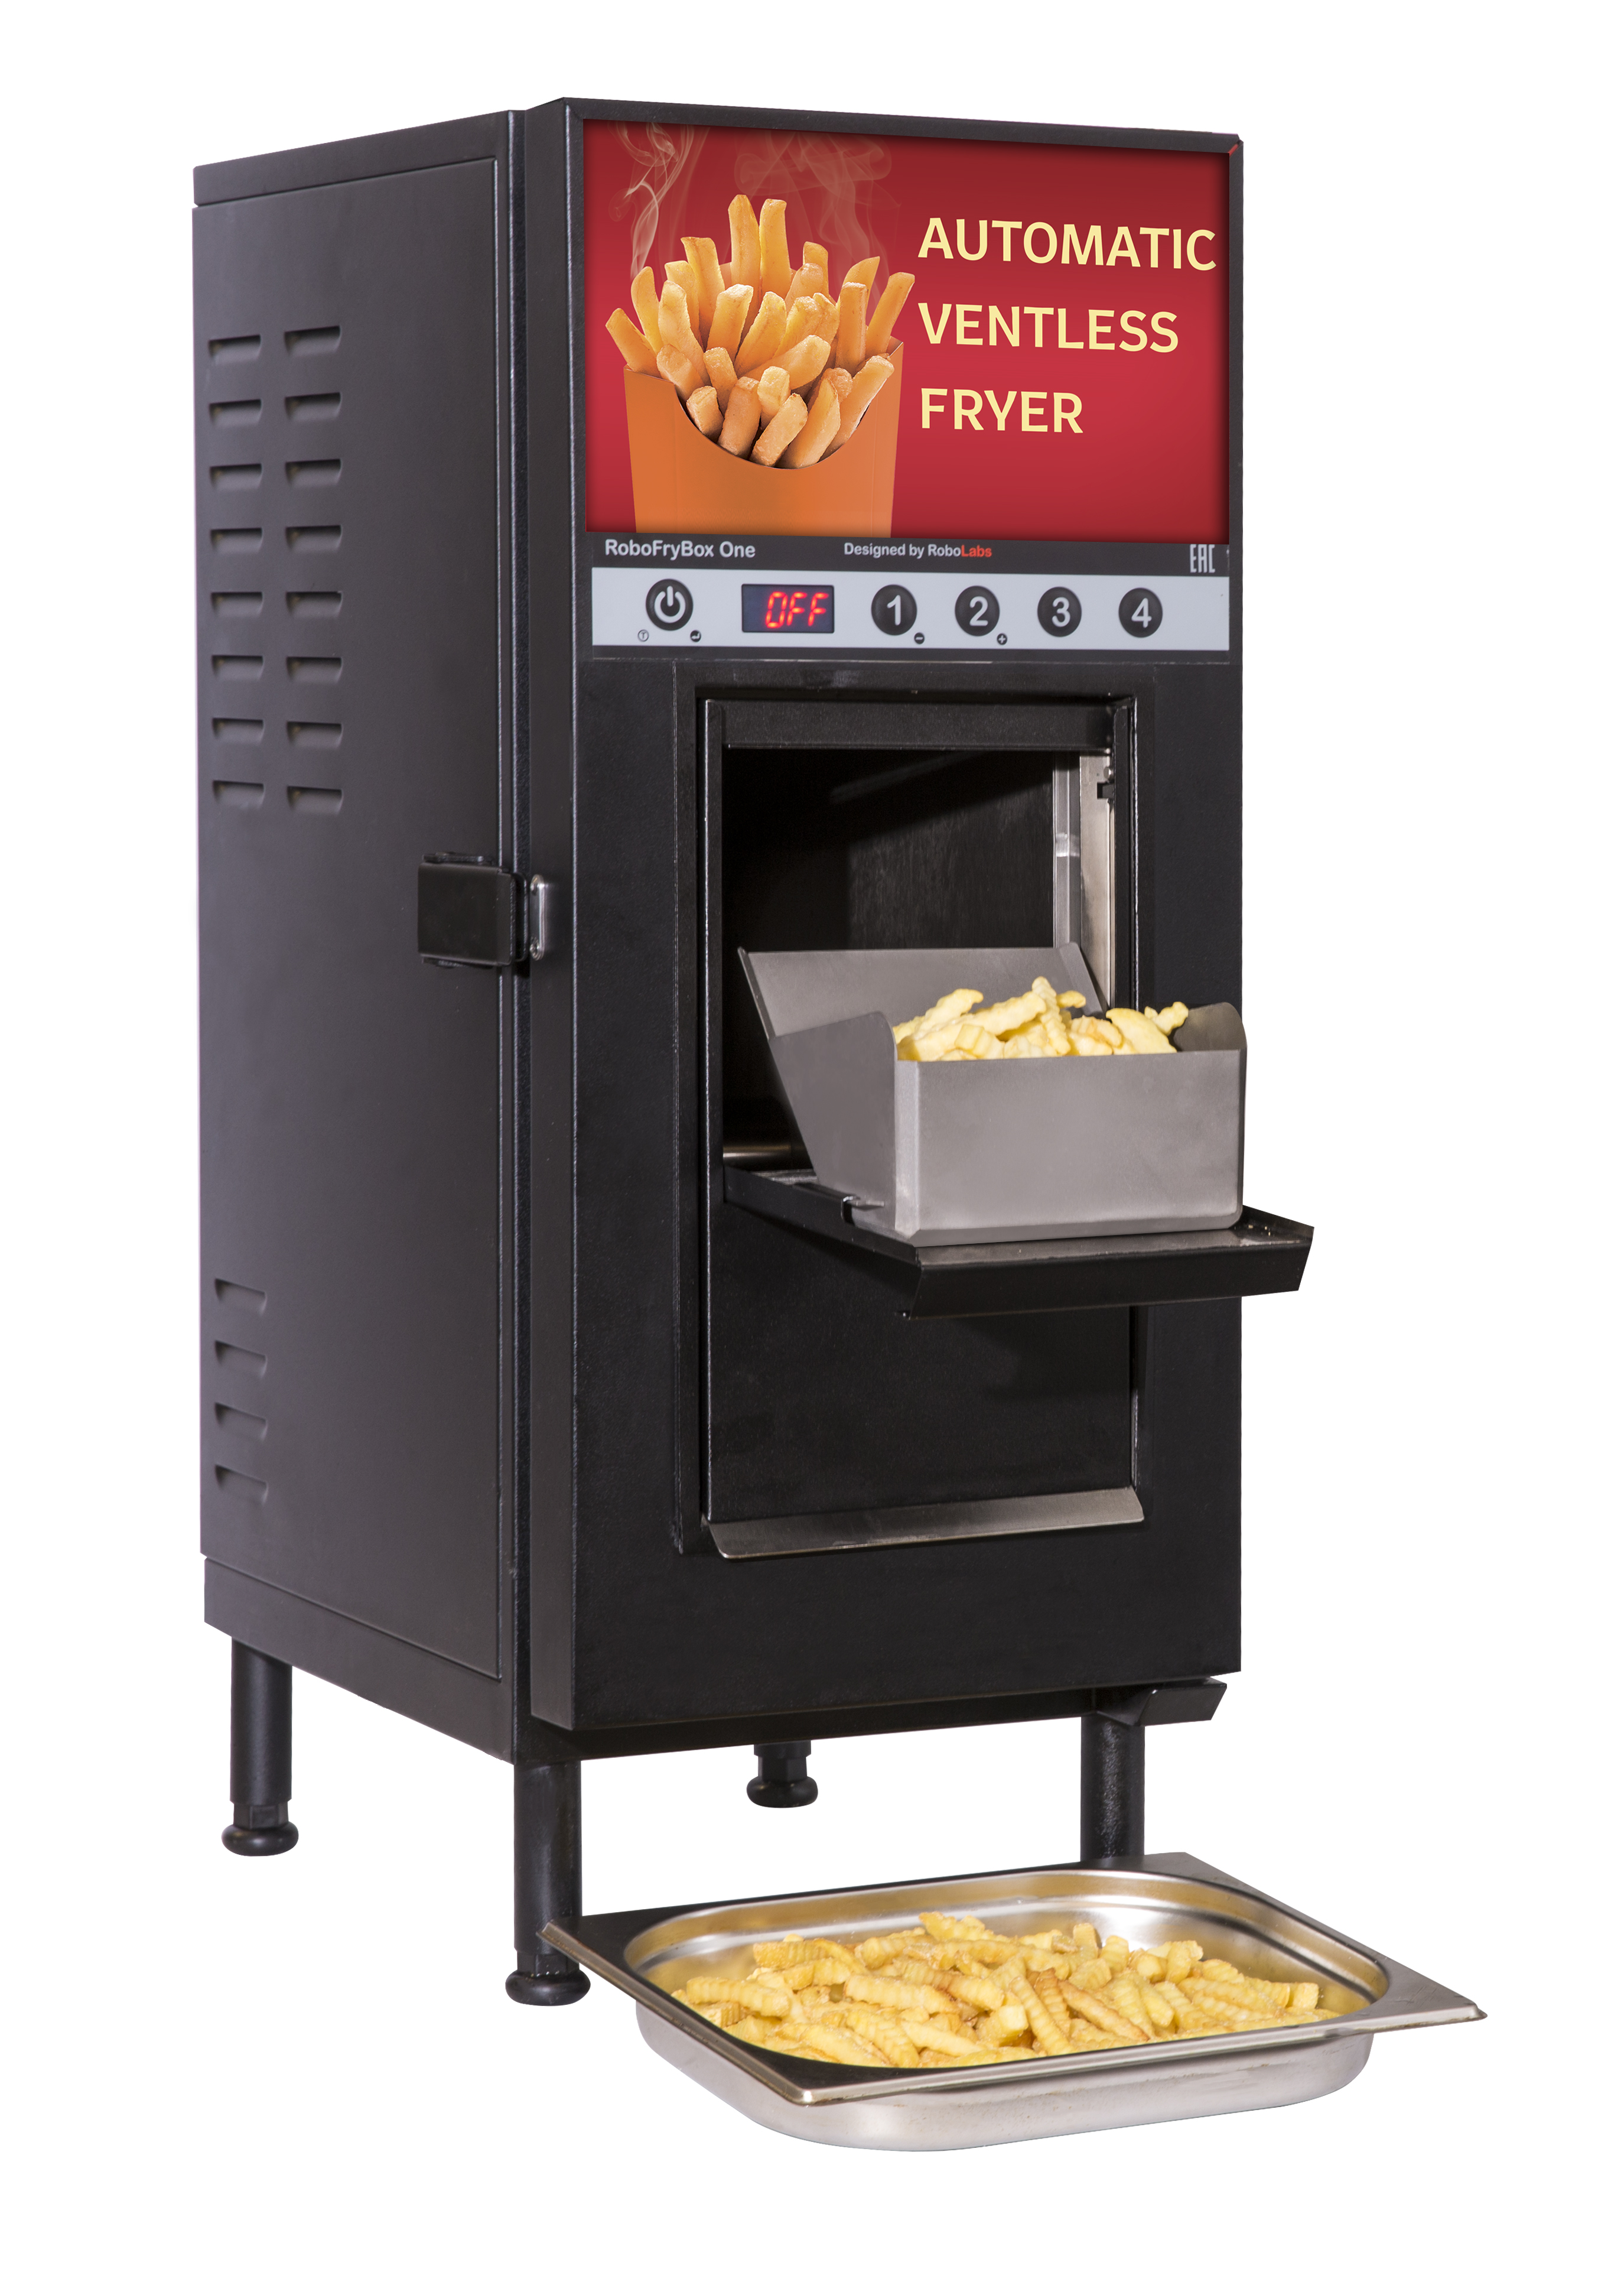 Table-top Automatic Ventless Fryer RoboFryBox One (Black)